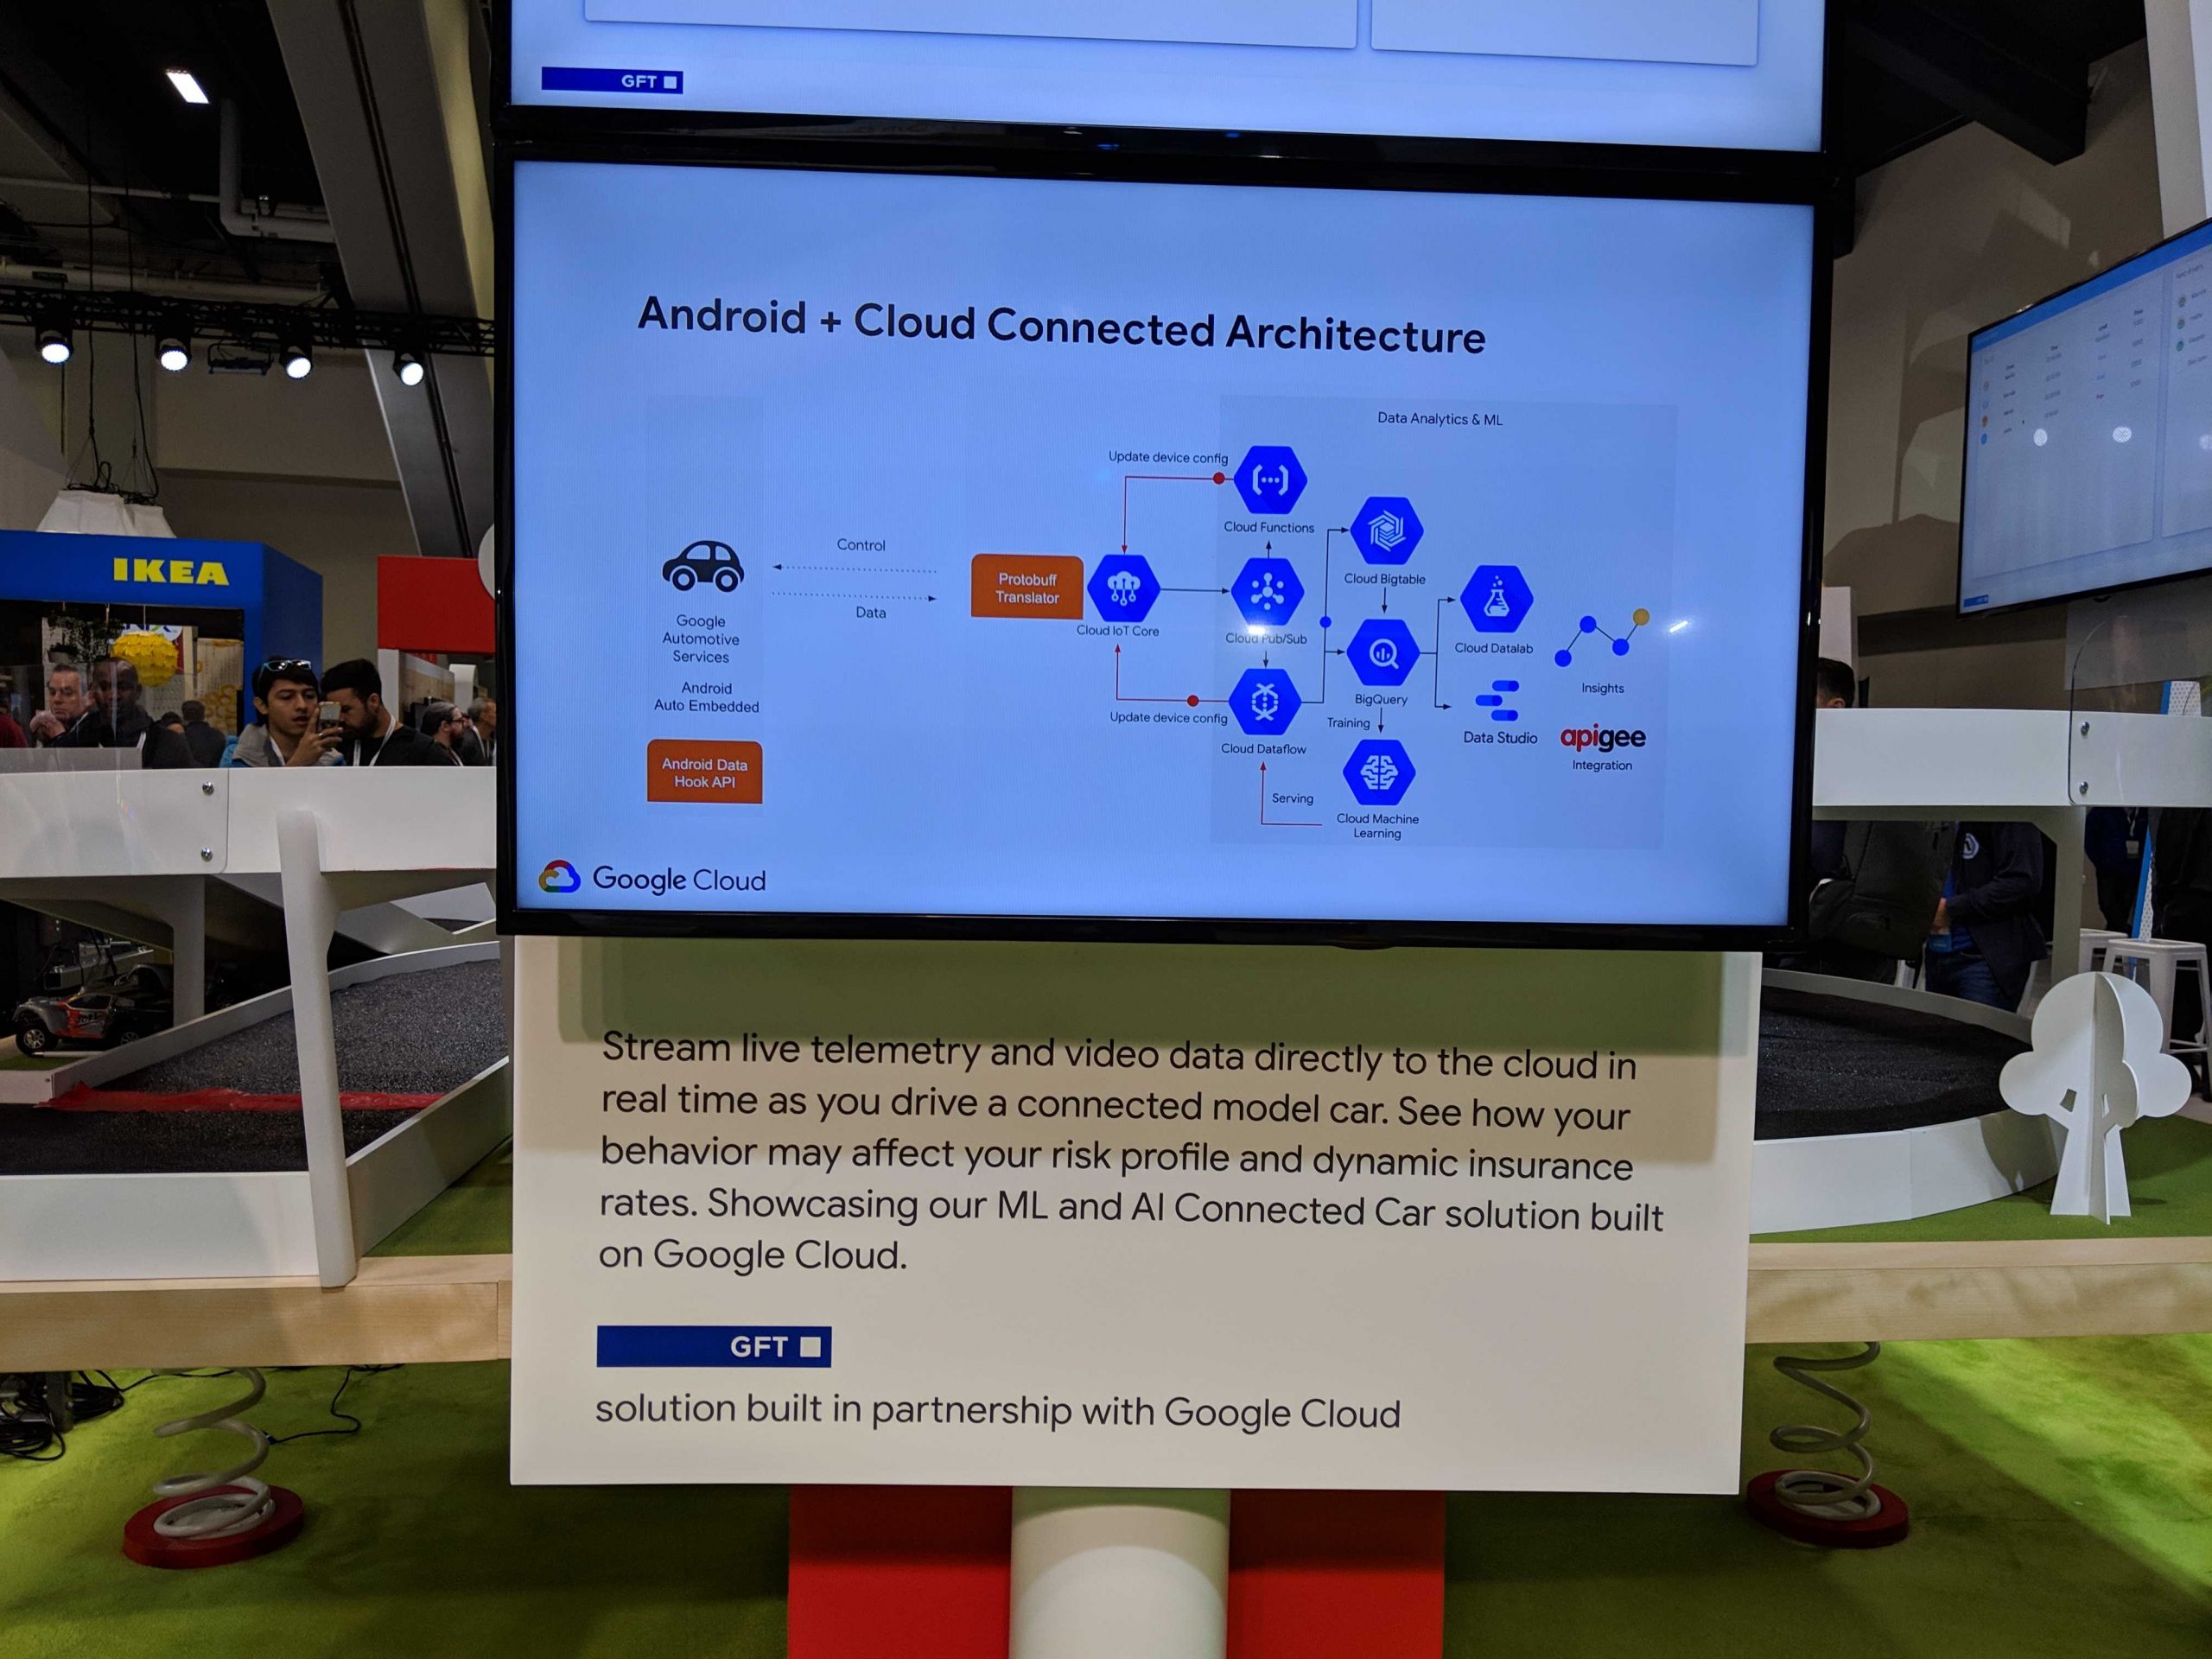 Android + Cloud Connected Architecture